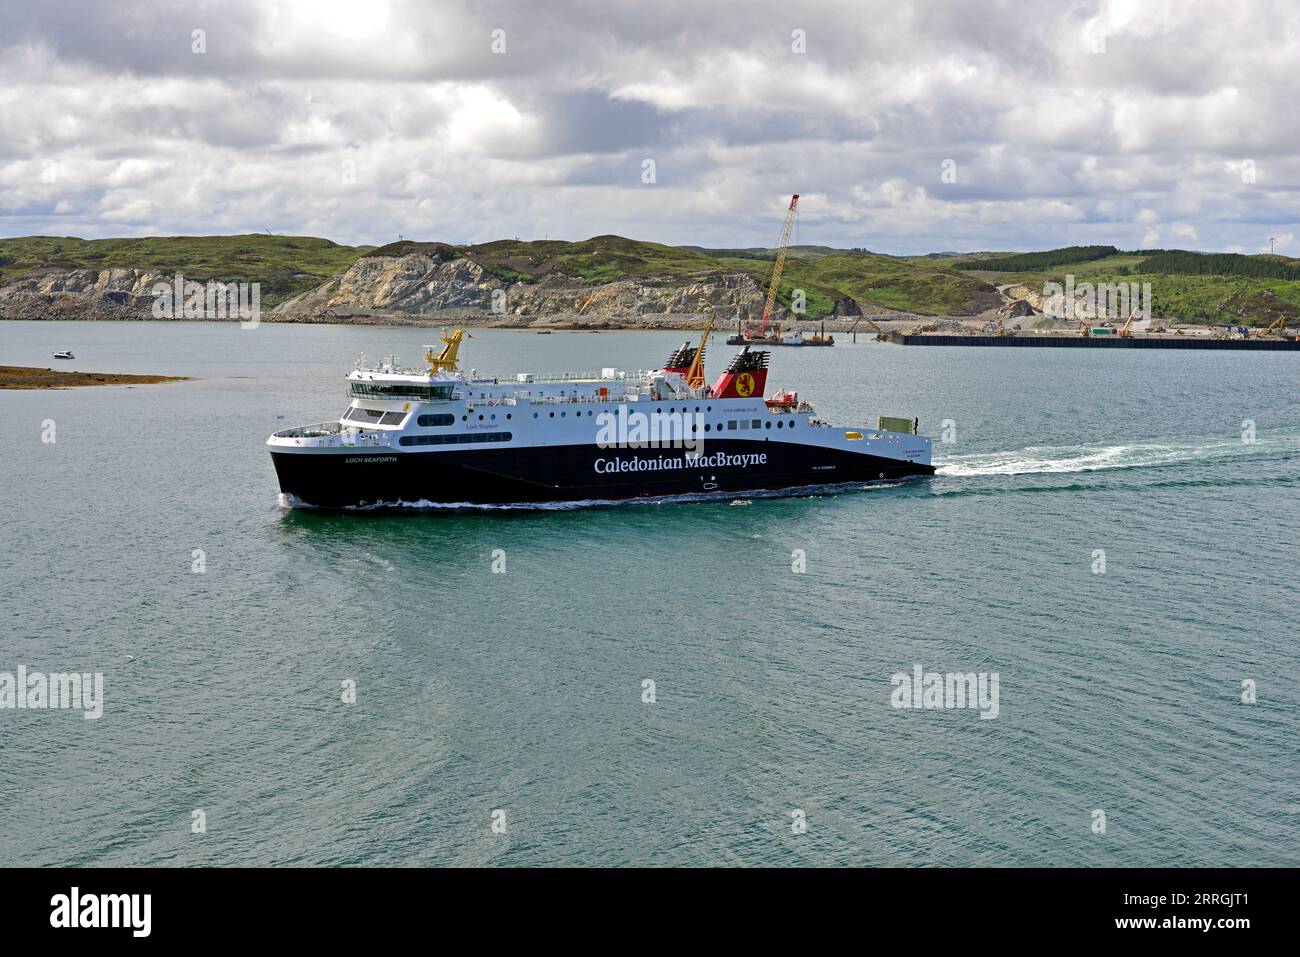 The Caledonian MacBrayne Passenger/RoRo Cargo Ferry 'Loch Seaforth is seen departing Stornoway Isle of Lewis for Ullapool on the Scottish mainland. Stock Photo